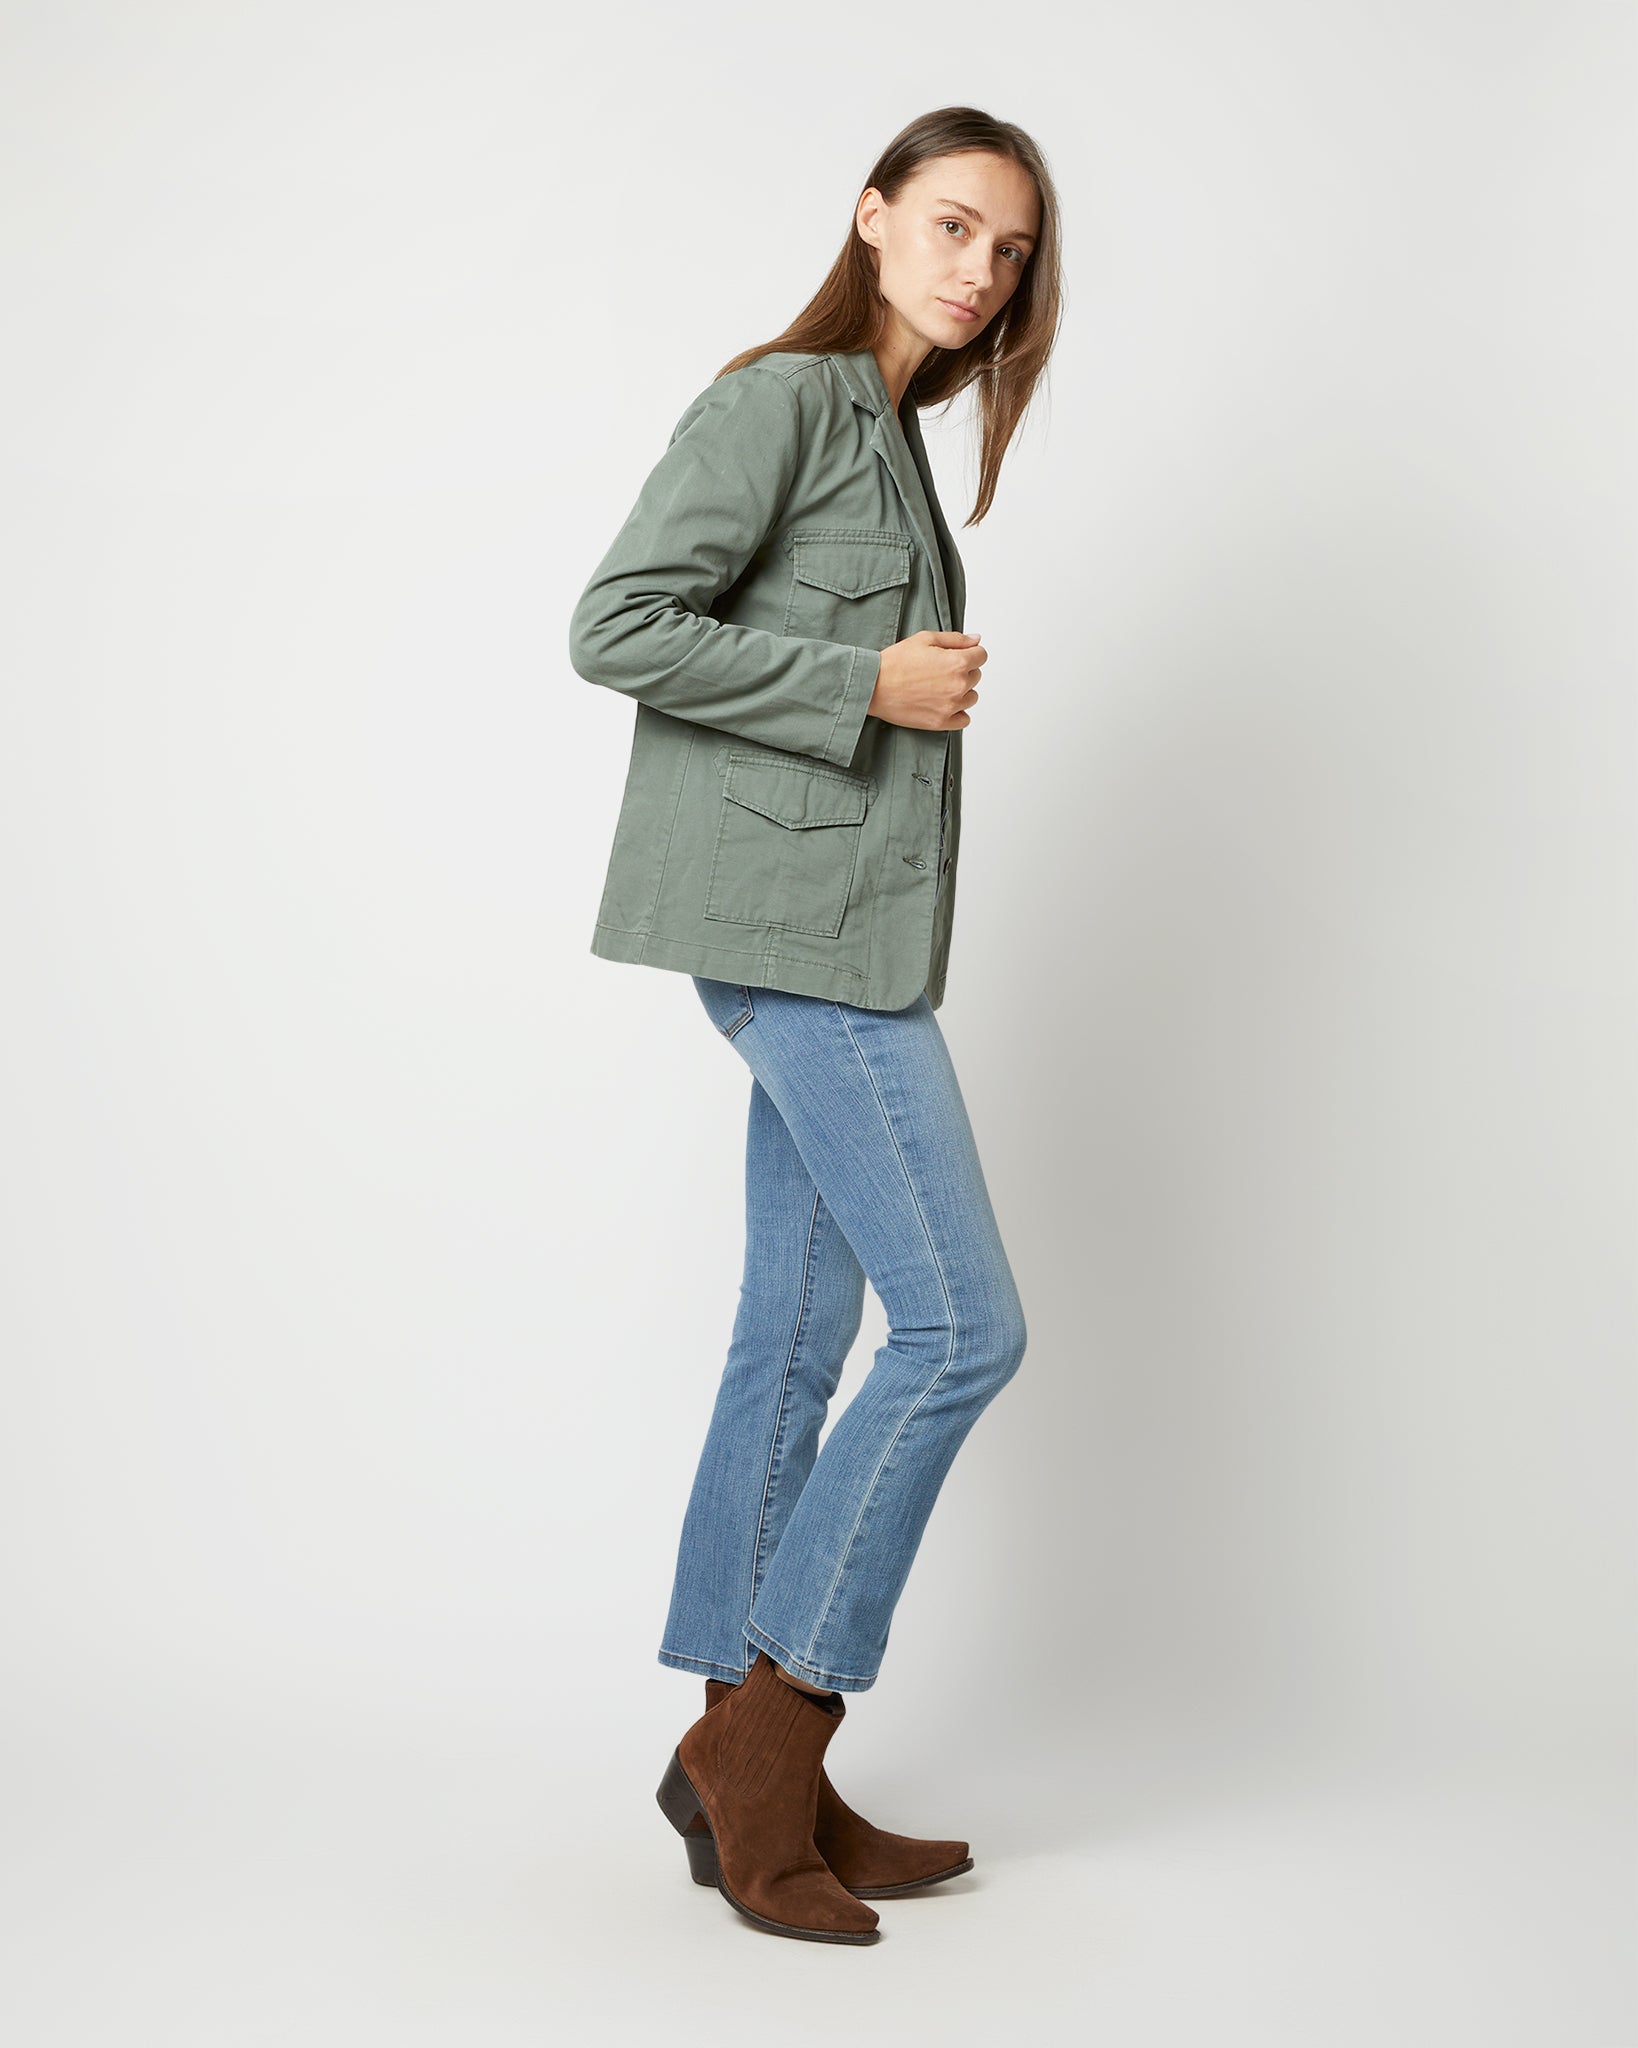 Military Jacket in Army Green